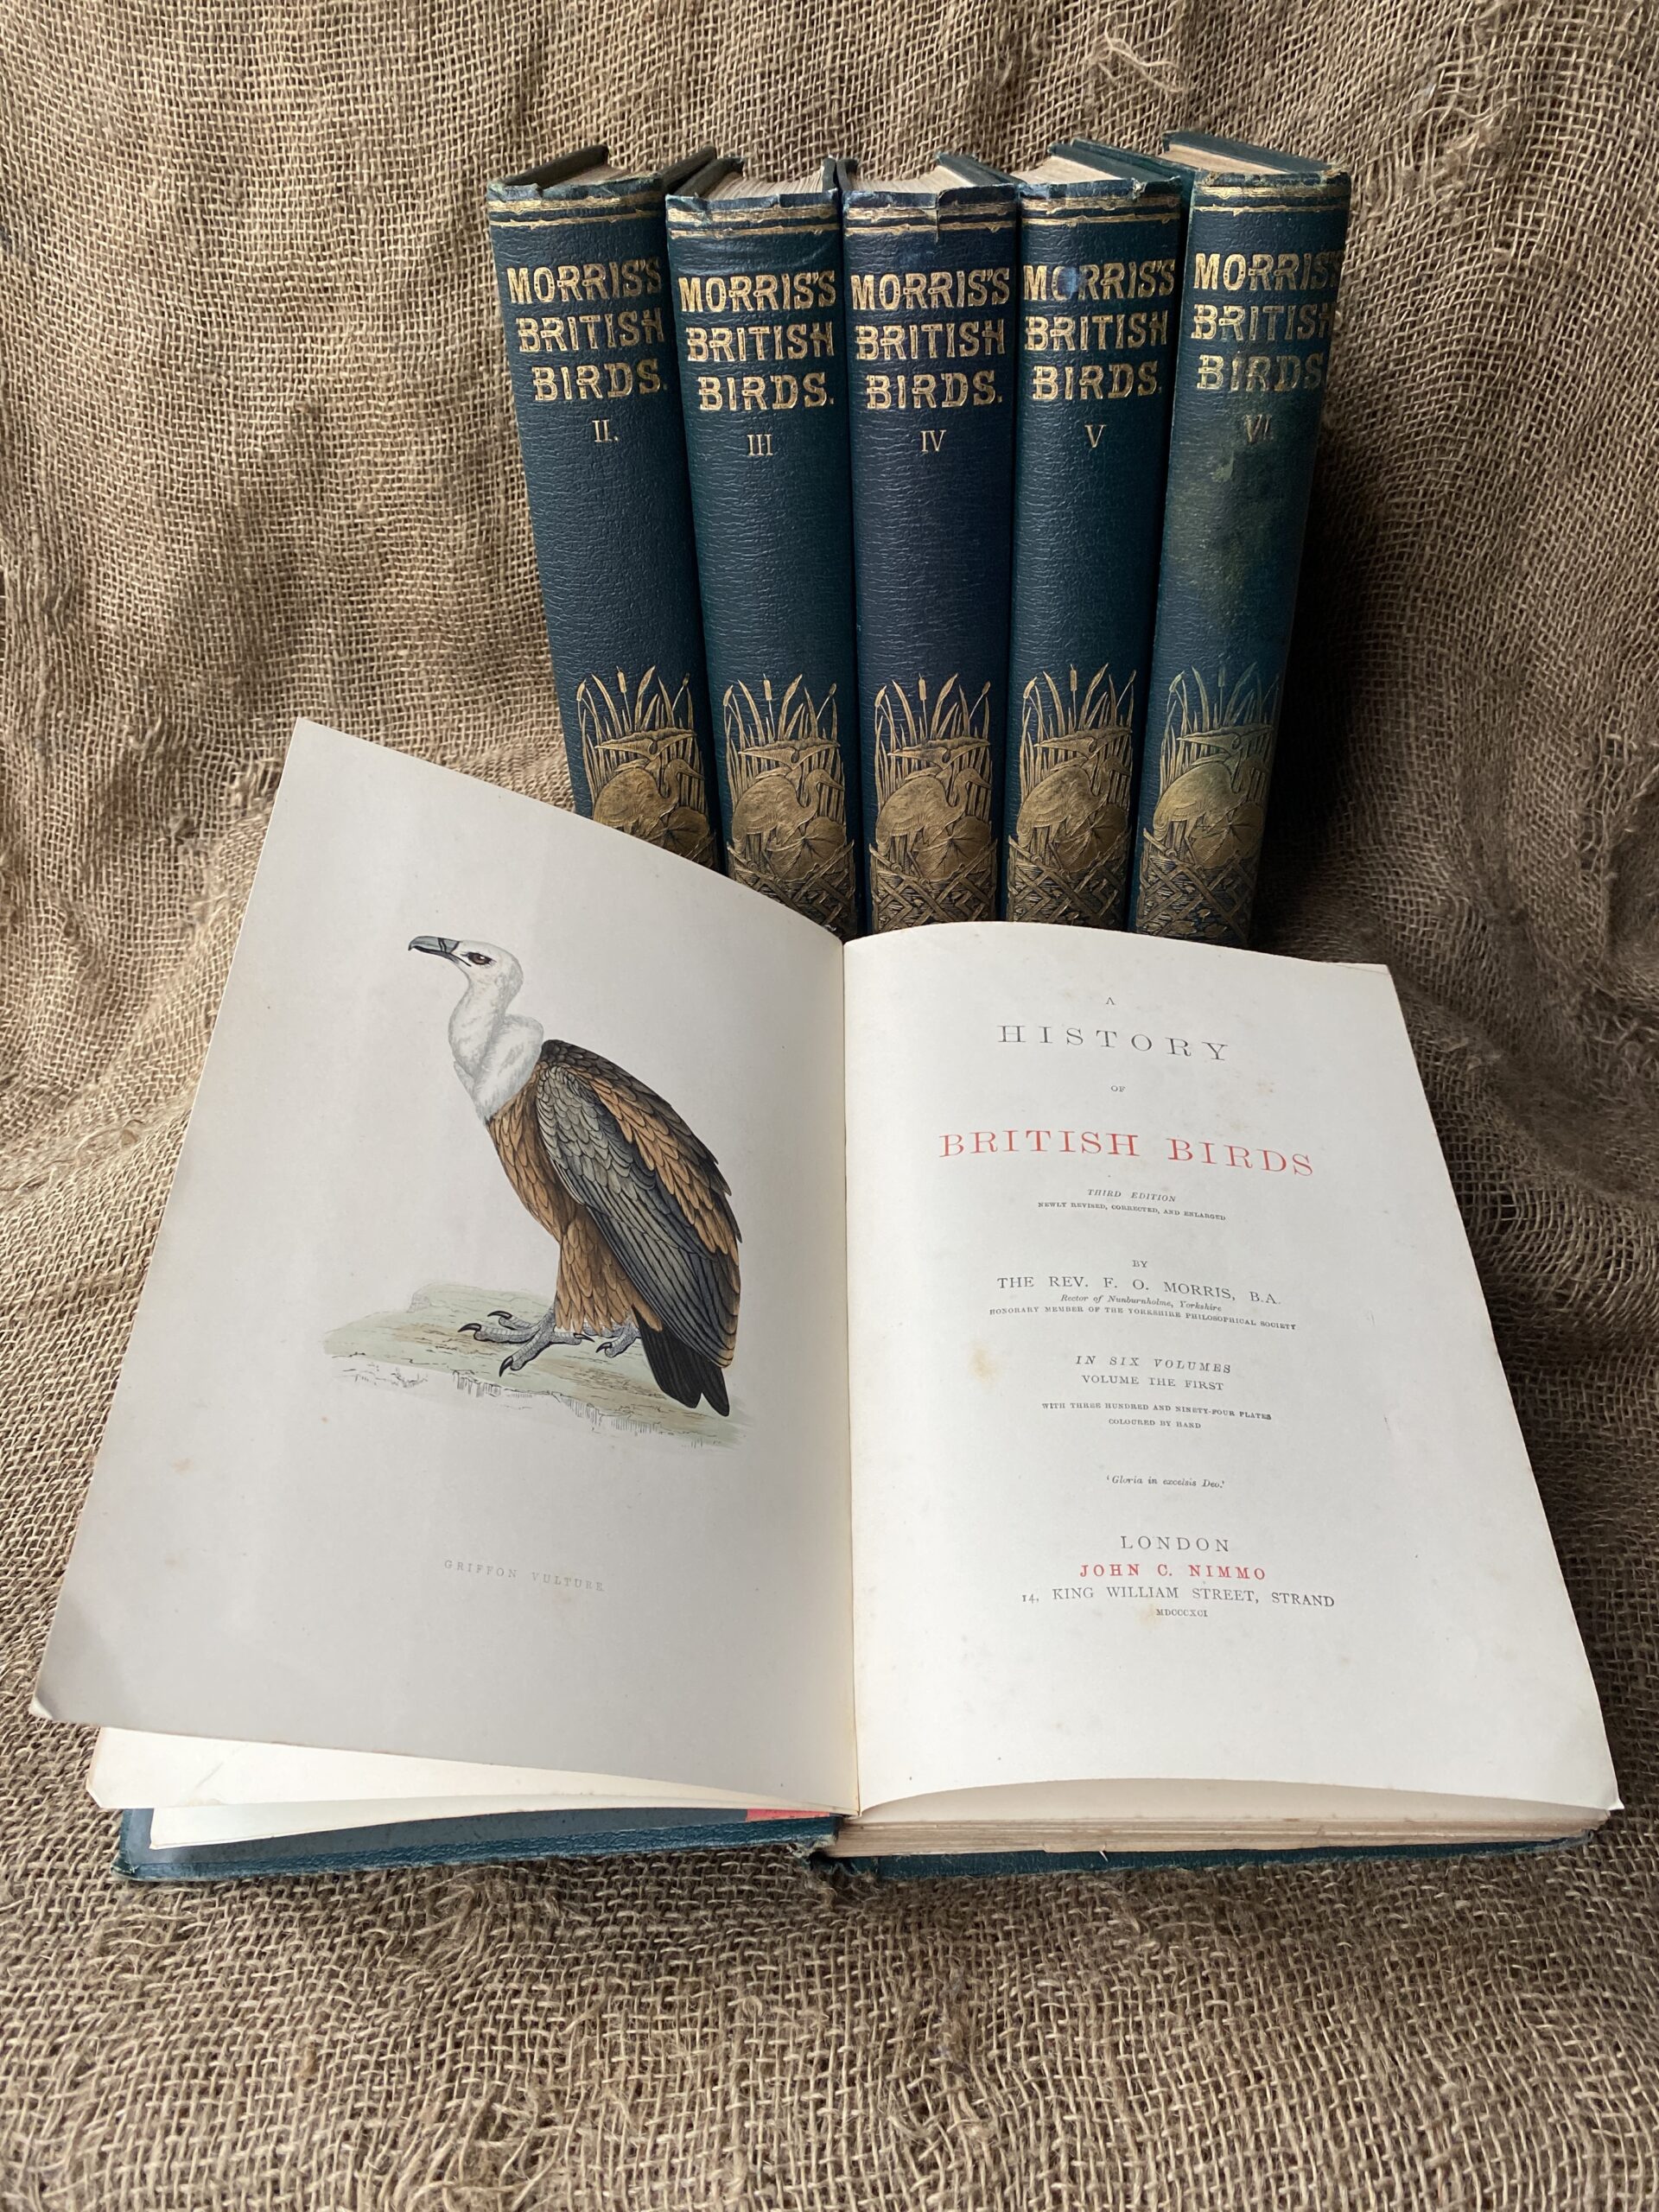 Revd. F. O. Morris - The History Of British Birds 1891 Complete 6 Volumes